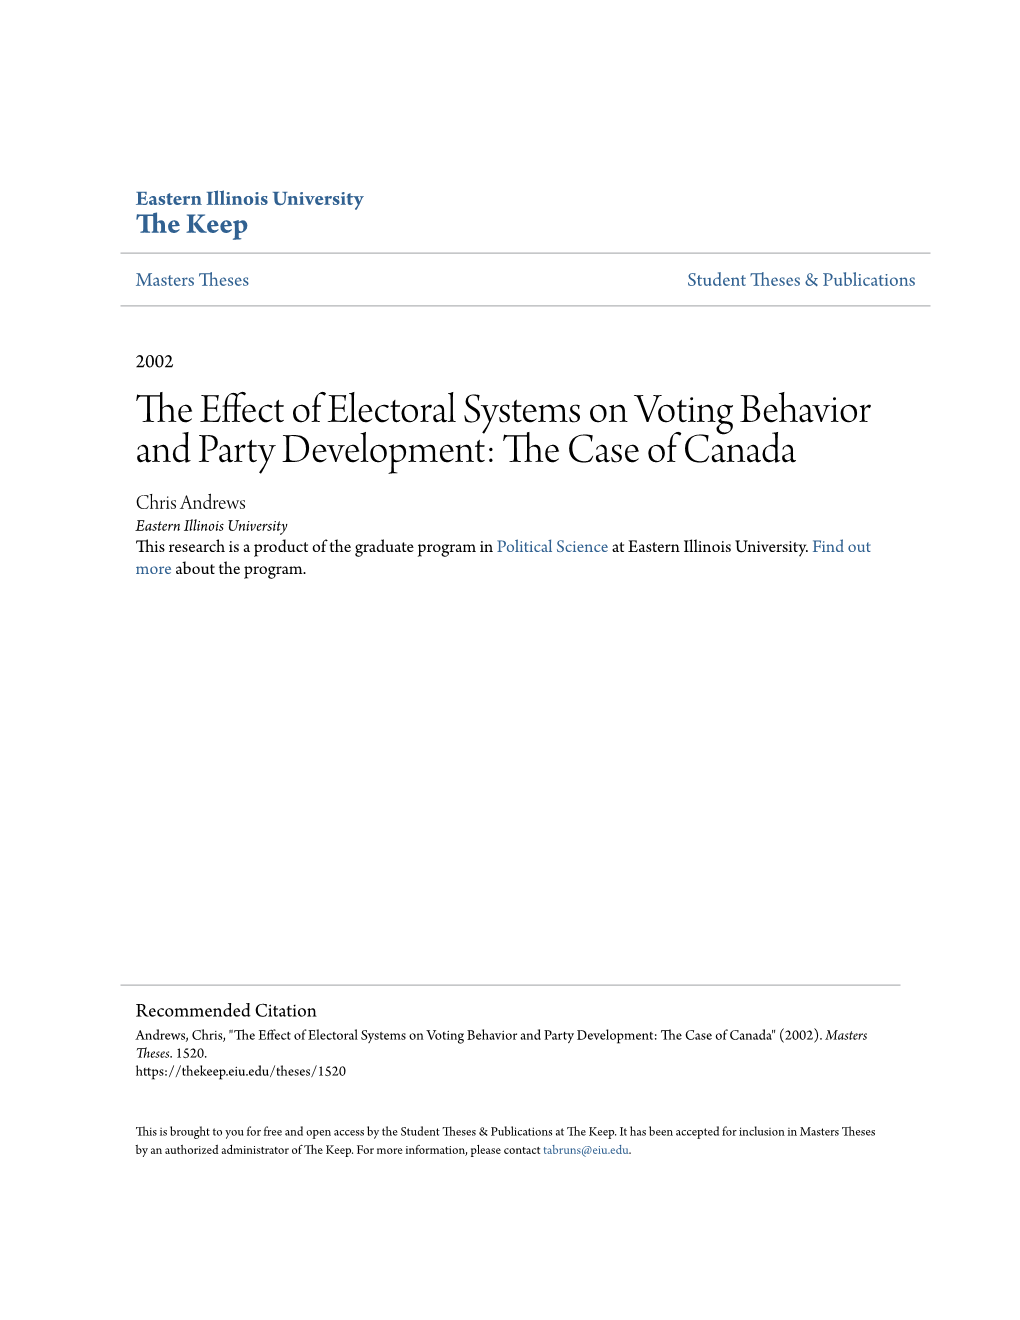 The Effect of Electoral Systems on Voting Behavior and Party Development: the Asc E of Canada" (2002)